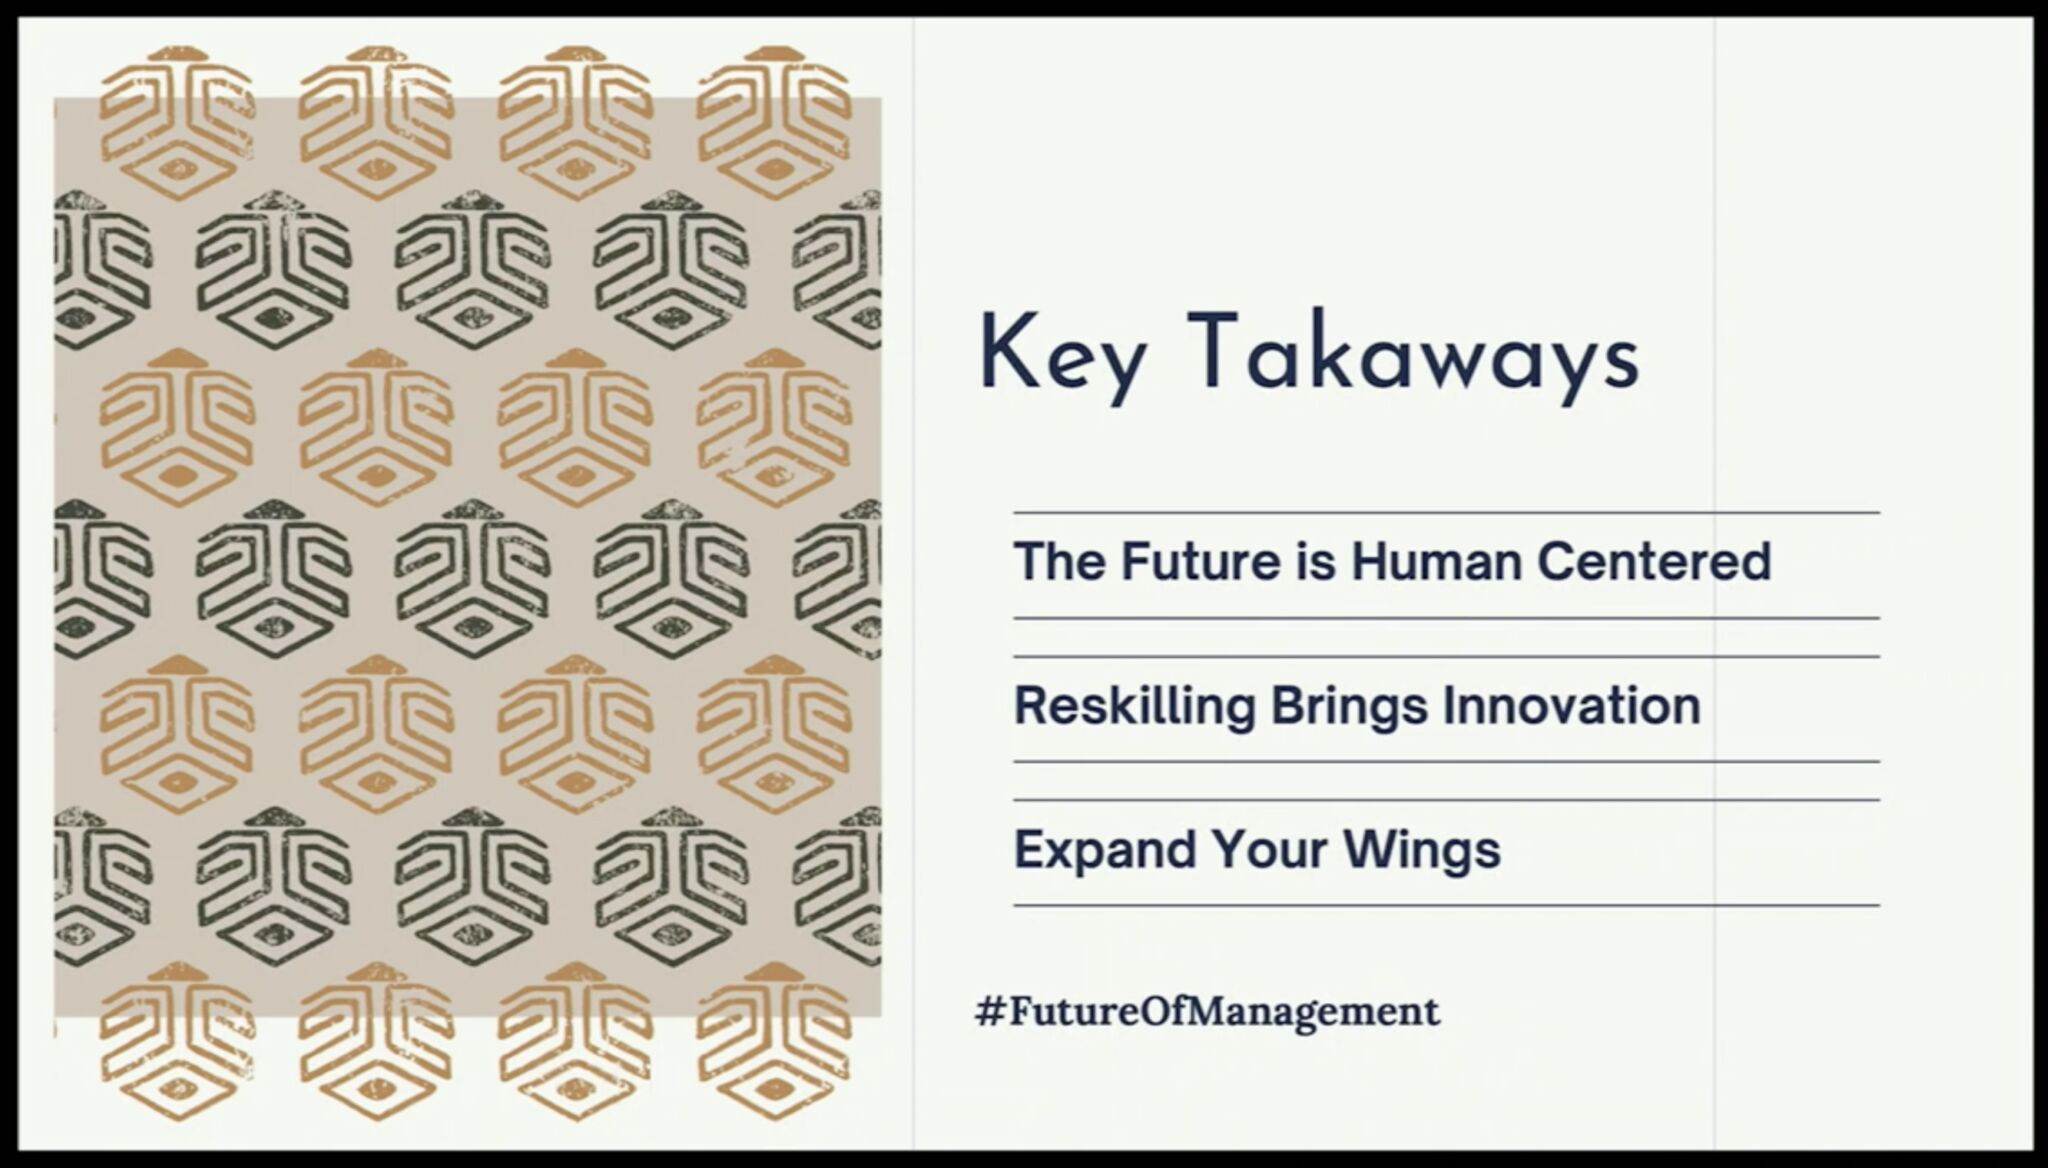 Valerie Phoenix - Key Takeaways: The future is Human Centered, Reskilling Brings Innovation, Expand Your Wings